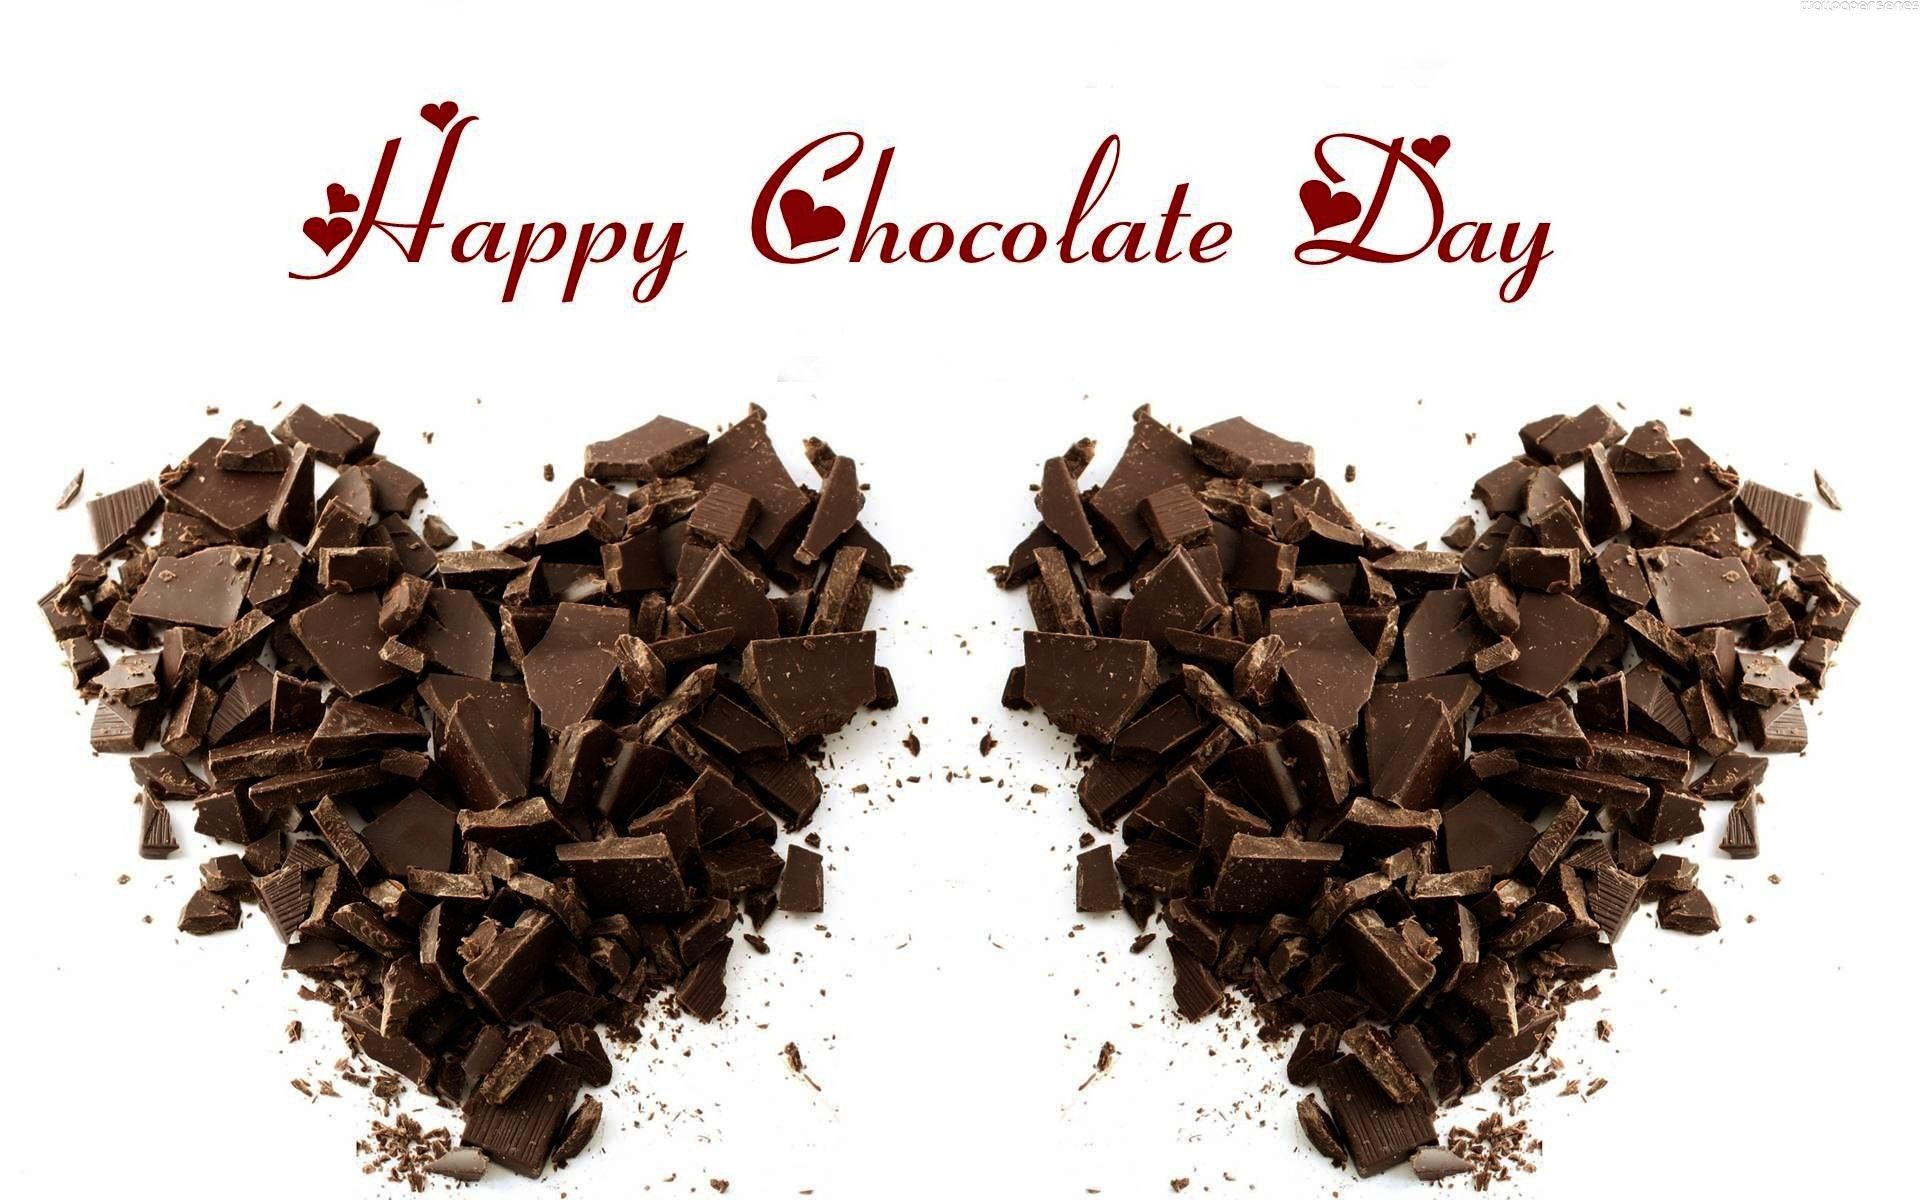 Download Send Chocolate Day Wallpapers E-greetings - Happy Chocolate Day  2019 - 1920x1200 Wallpaper 